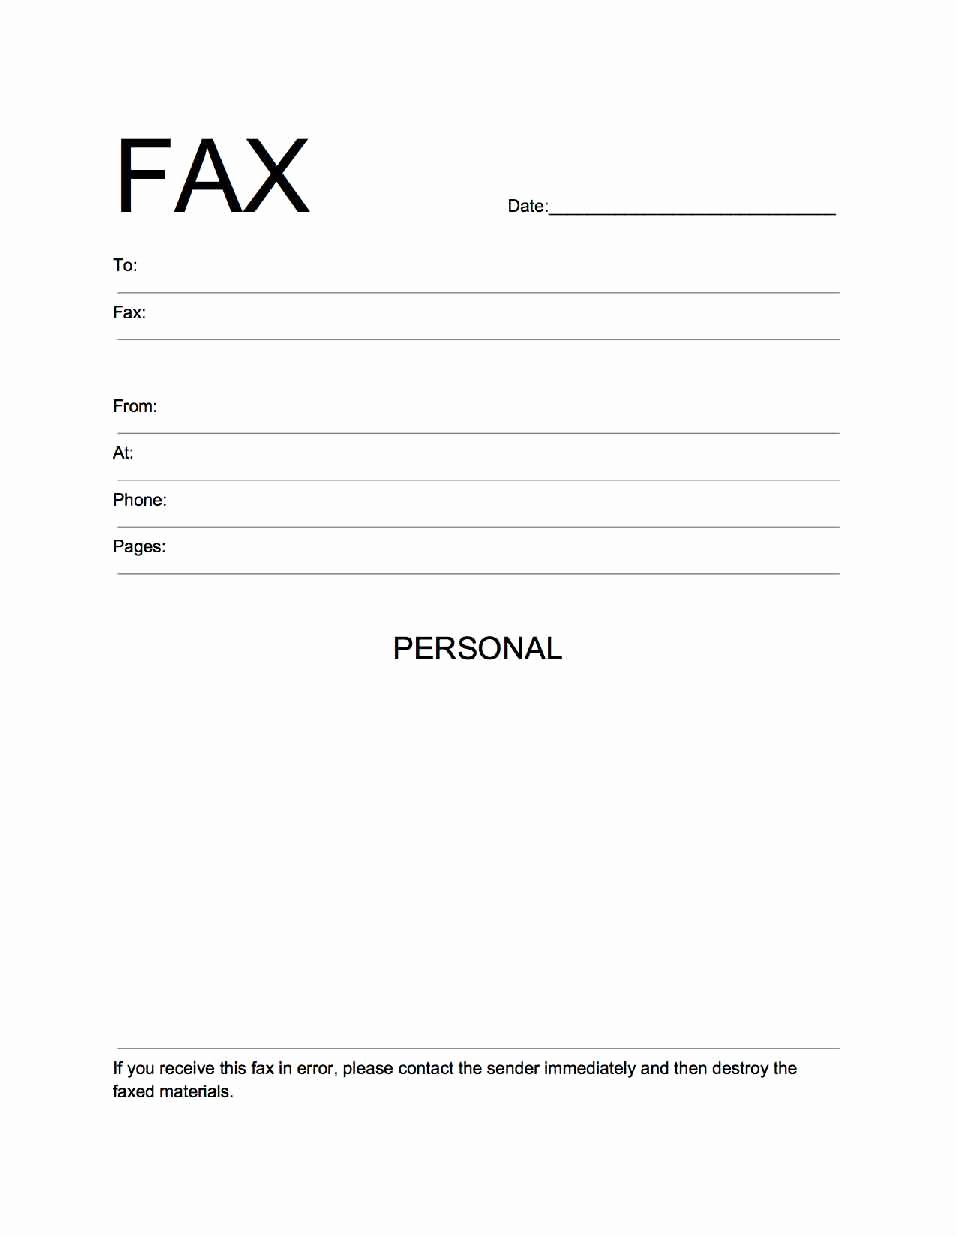 Sample Of Fax Cover Sheet Inspirational Free Fax Cover Sheet Template Download